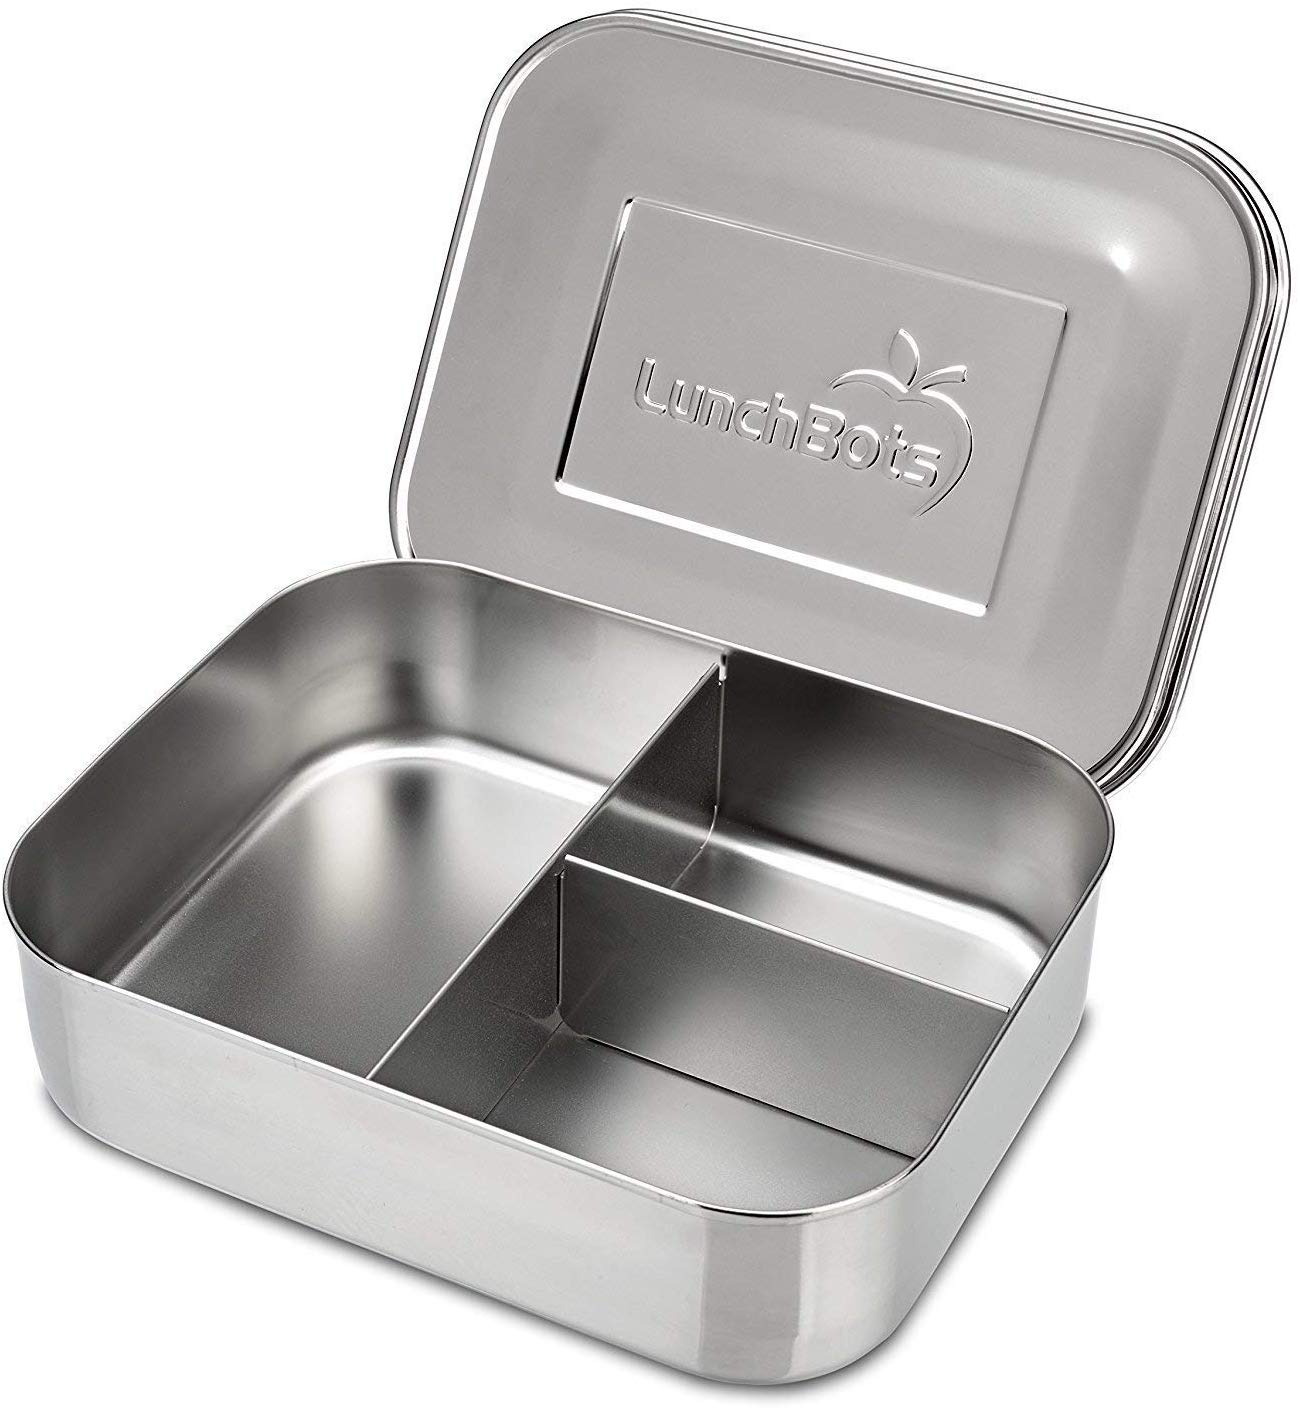 LunchBots Medium Trio II Divided Stainless Steel Food Container